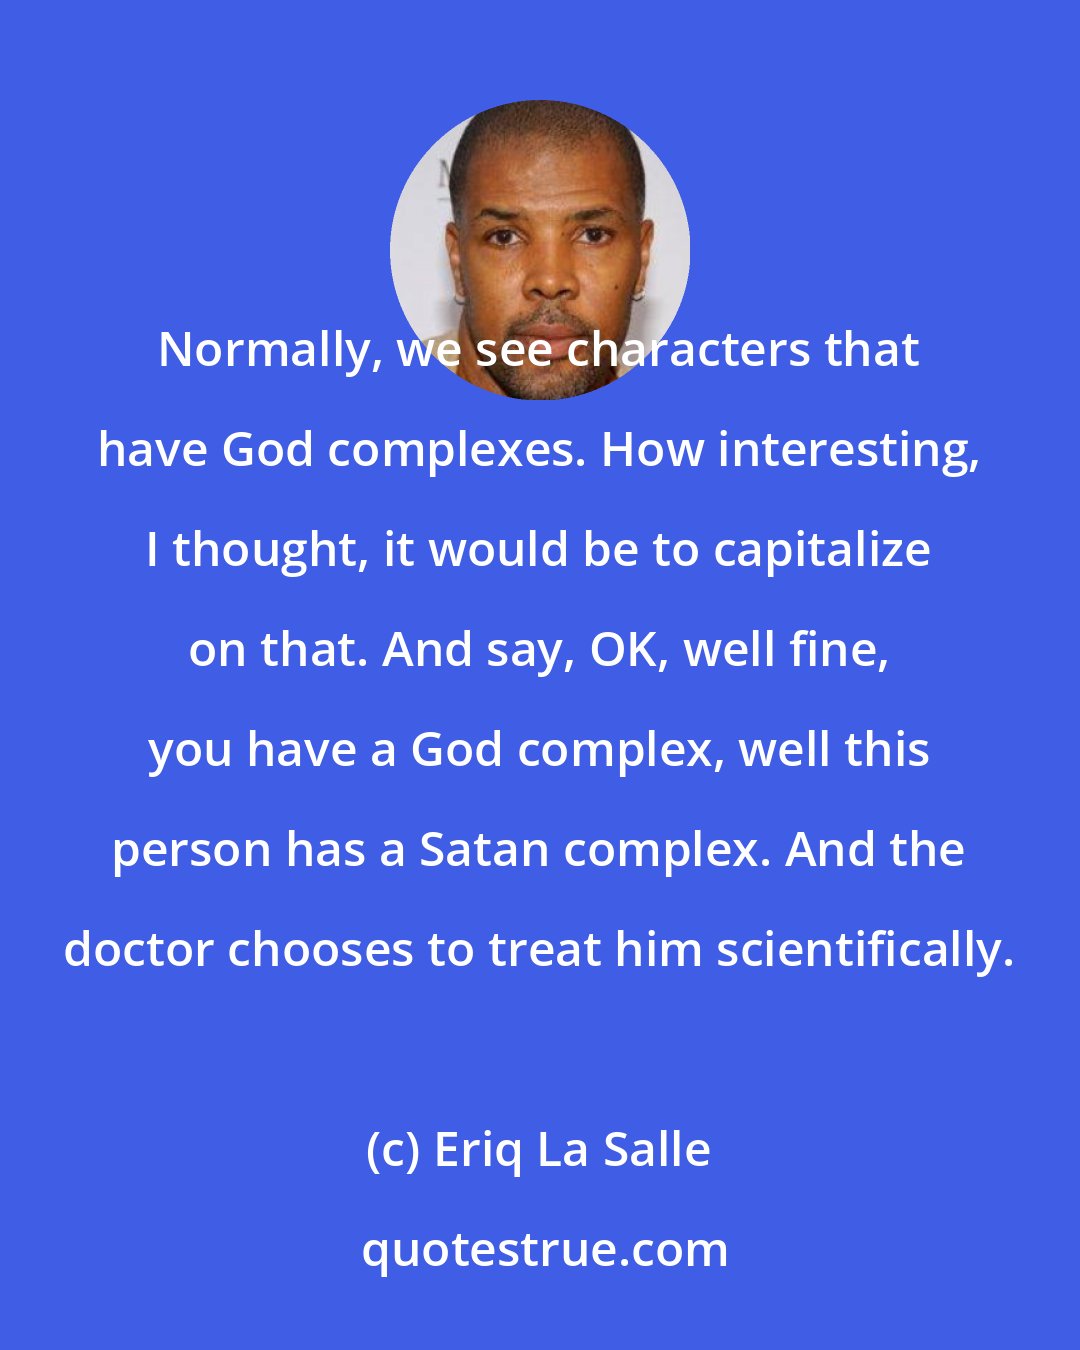 Eriq La Salle: Normally, we see characters that have God complexes. How interesting, I thought, it would be to capitalize on that. And say, OK, well fine, you have a God complex, well this person has a Satan complex. And the doctor chooses to treat him scientifically.